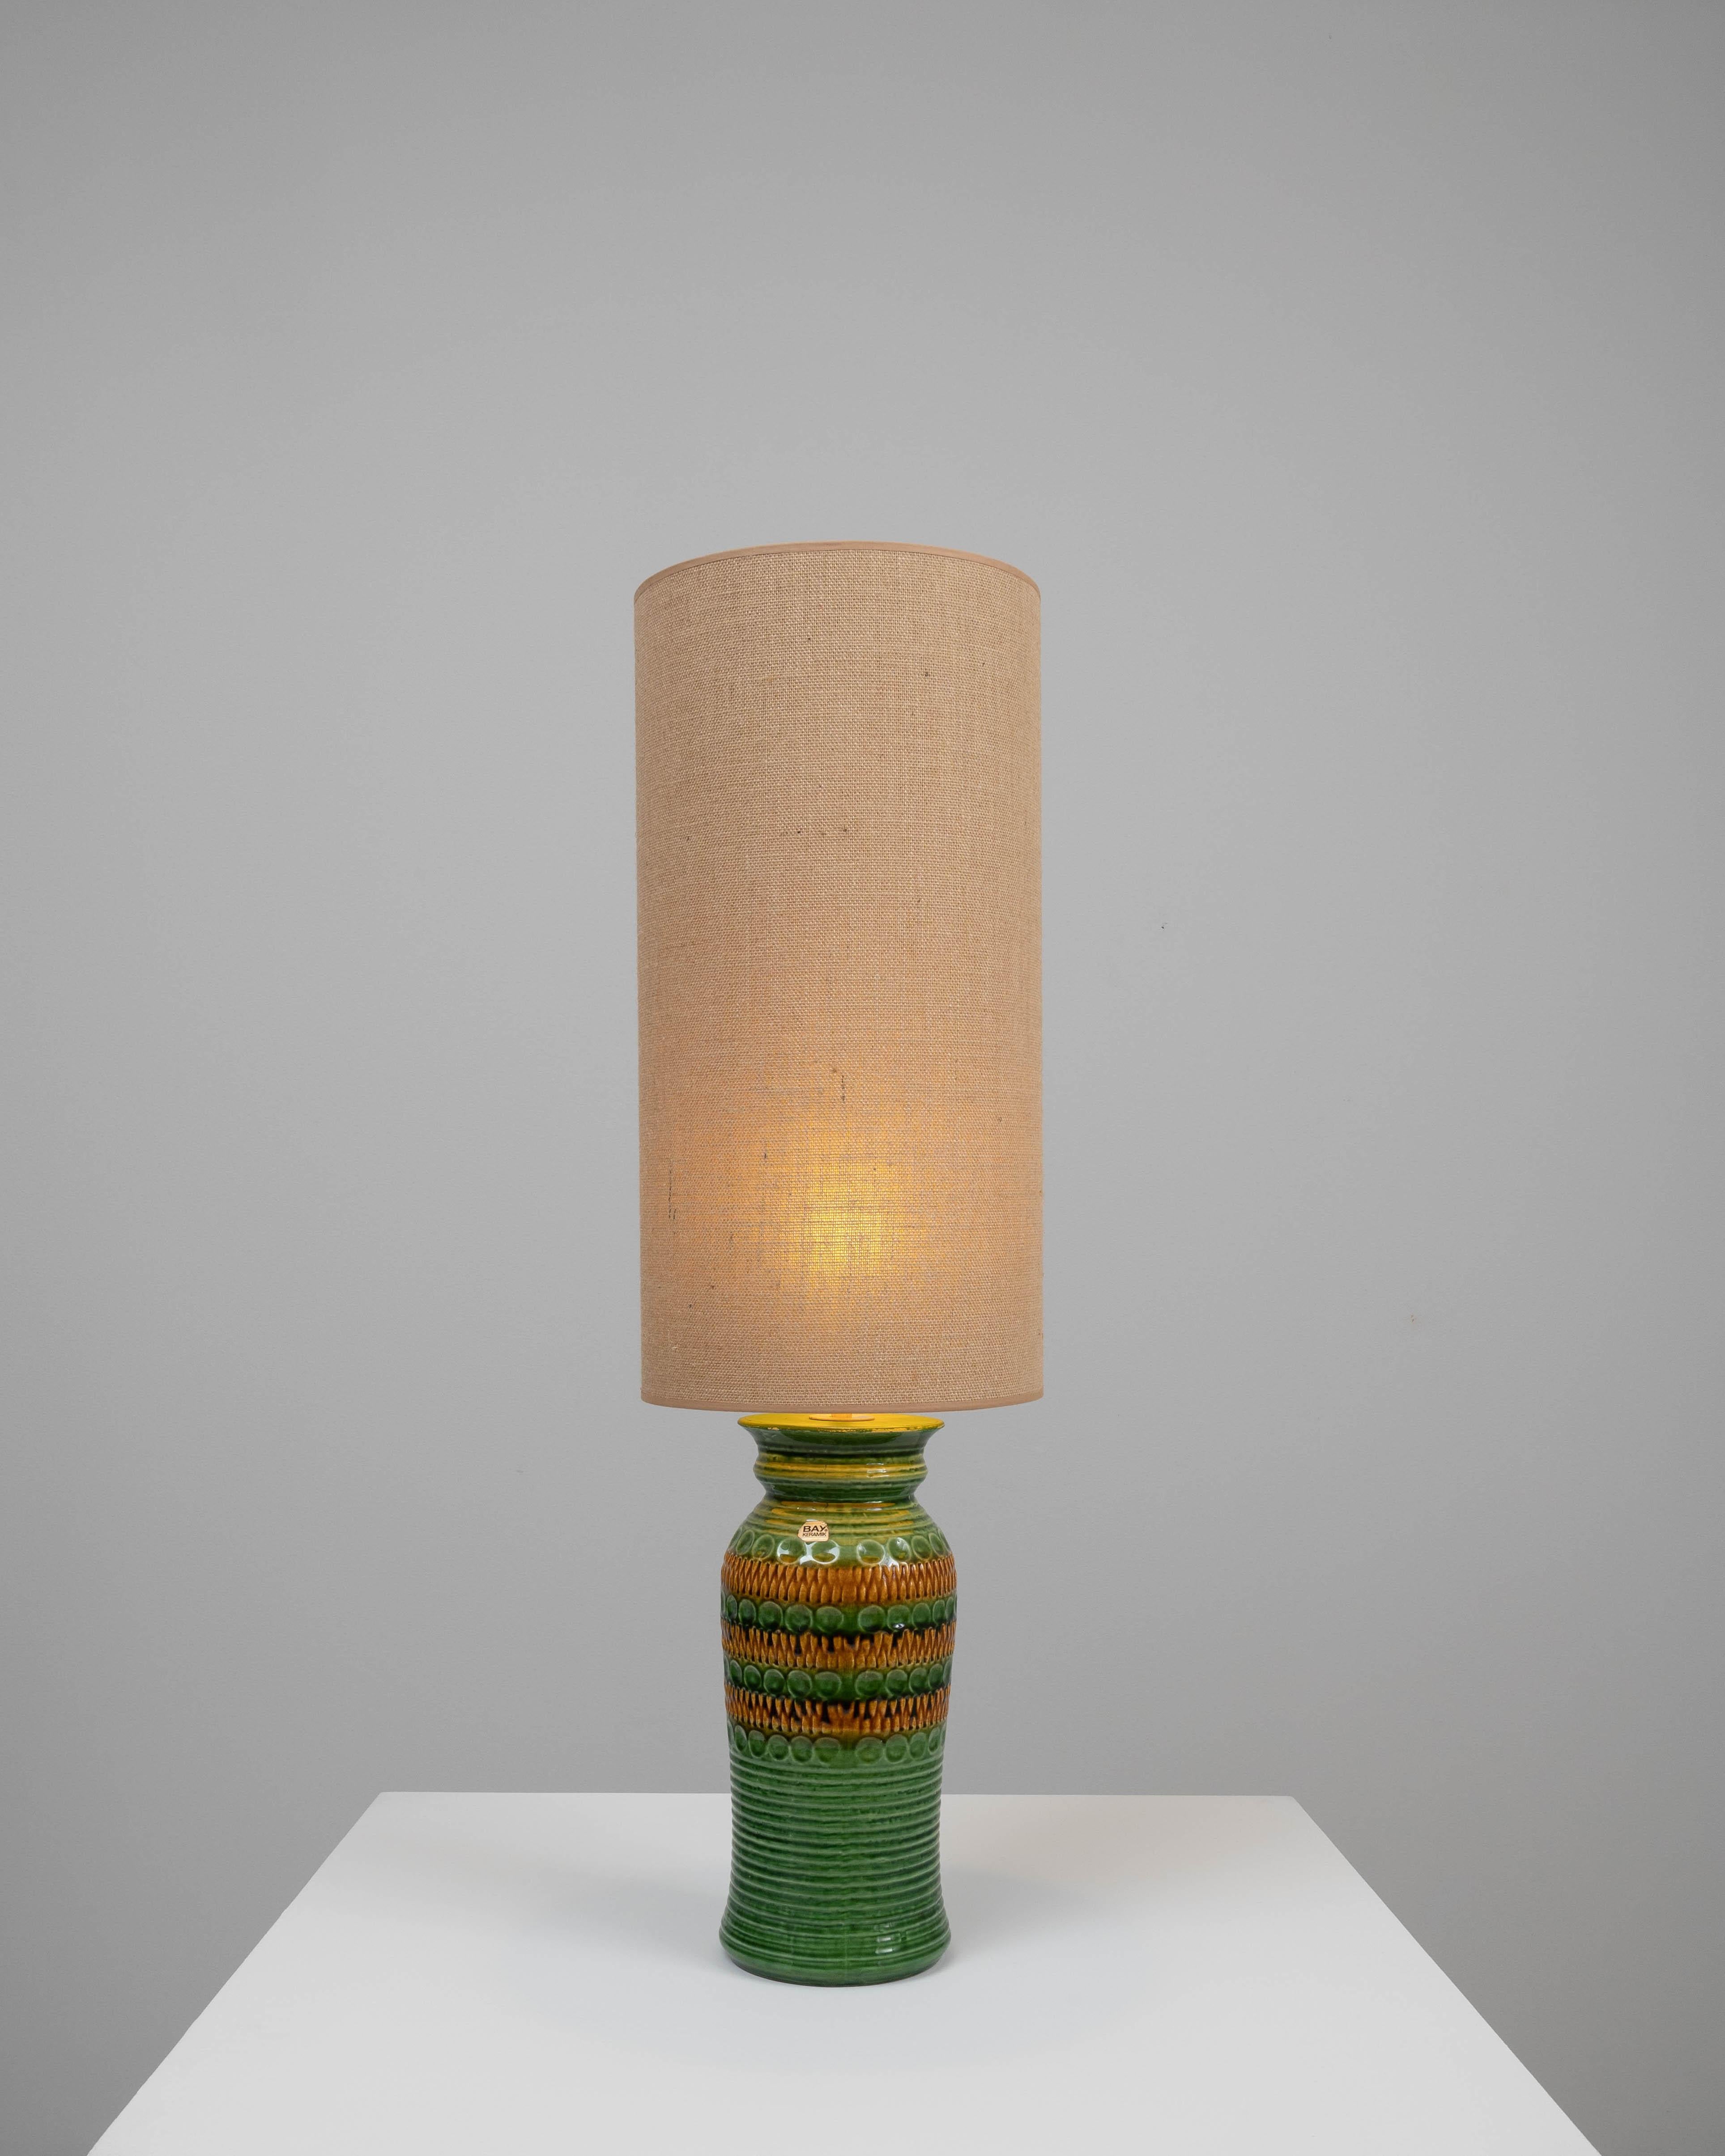 This charming 20th-century German ceramic table lamp combines the organic appeal of pottery with functional design. The lamp's base is a masterpiece of ceramic art, featuring vibrant green hues and intriguing textures that mimic natural forms. The